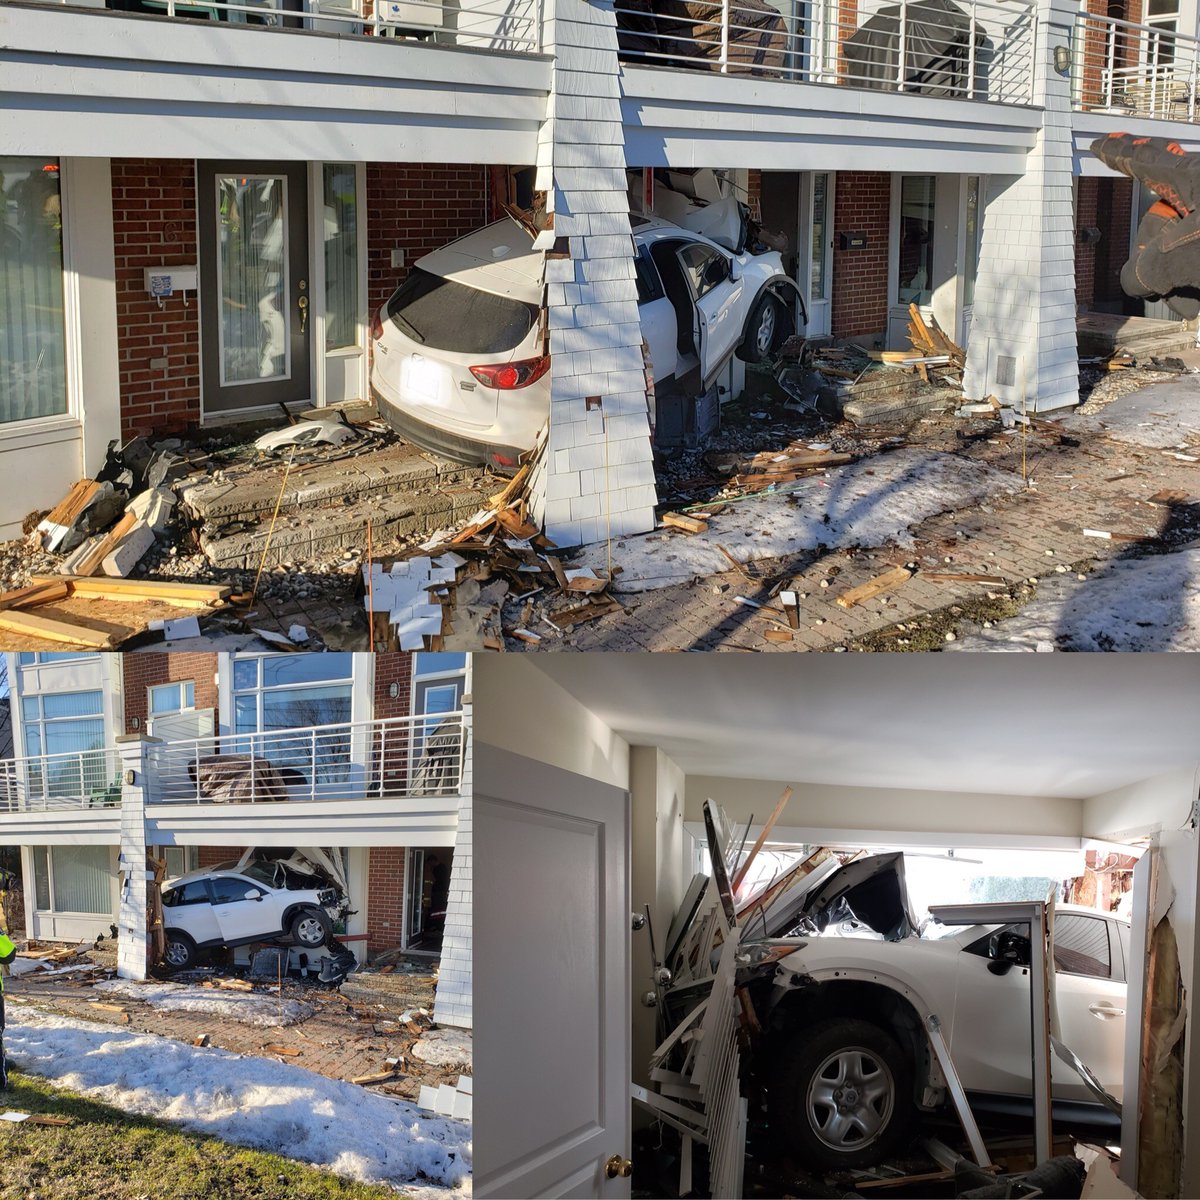 Ottawa fire services say a car has collided with a house in west Ottawa on Tuesday morning.